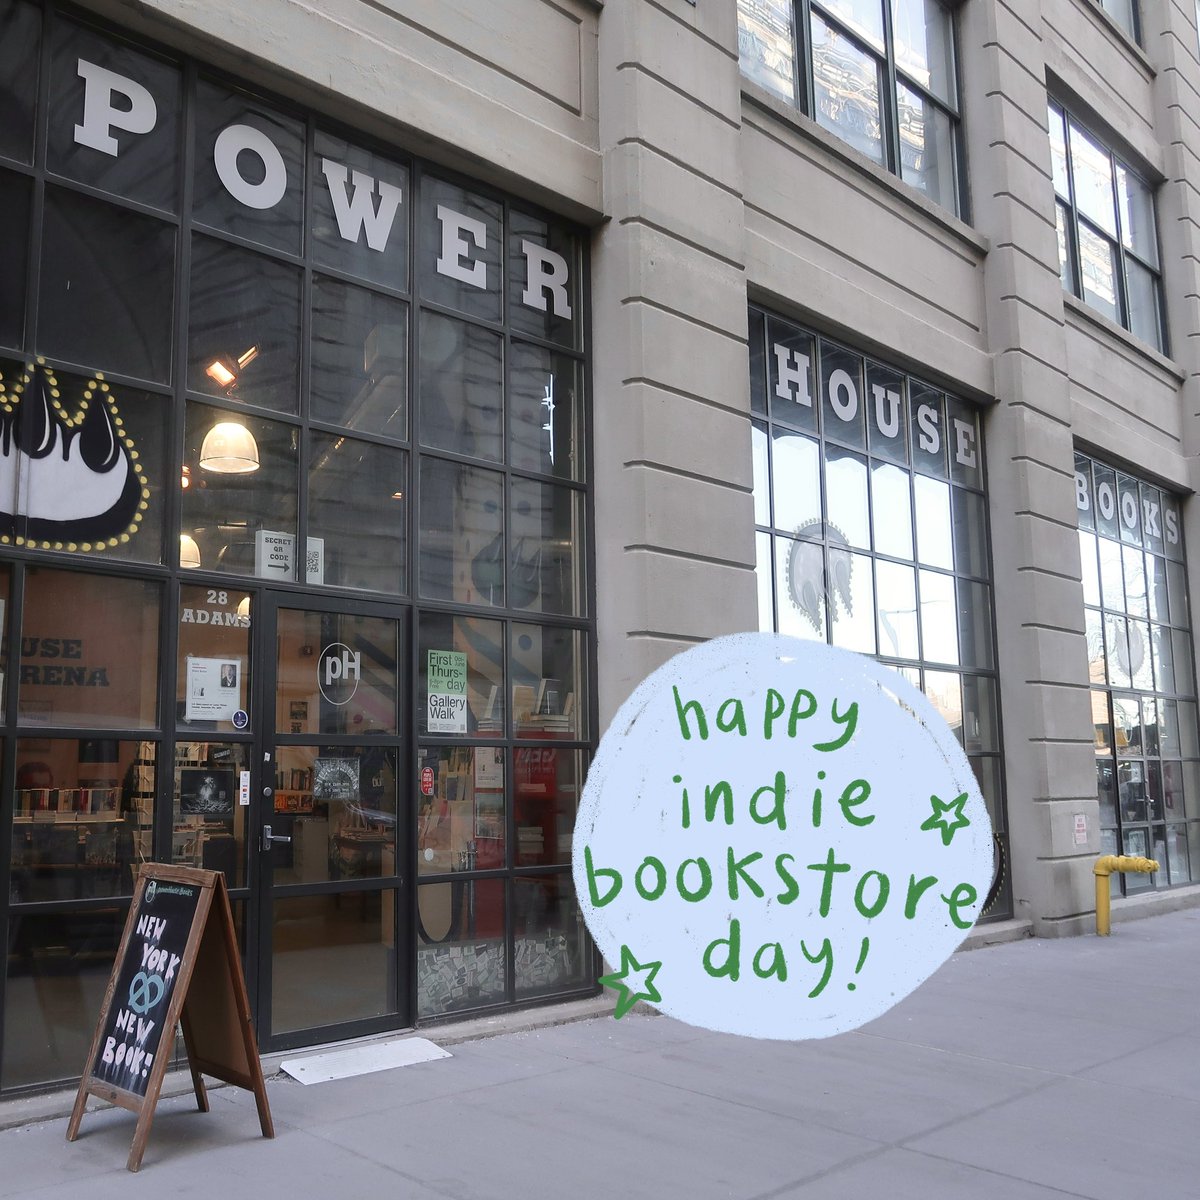 Happy independent bookstore day! Thank you all for supporting us 💙